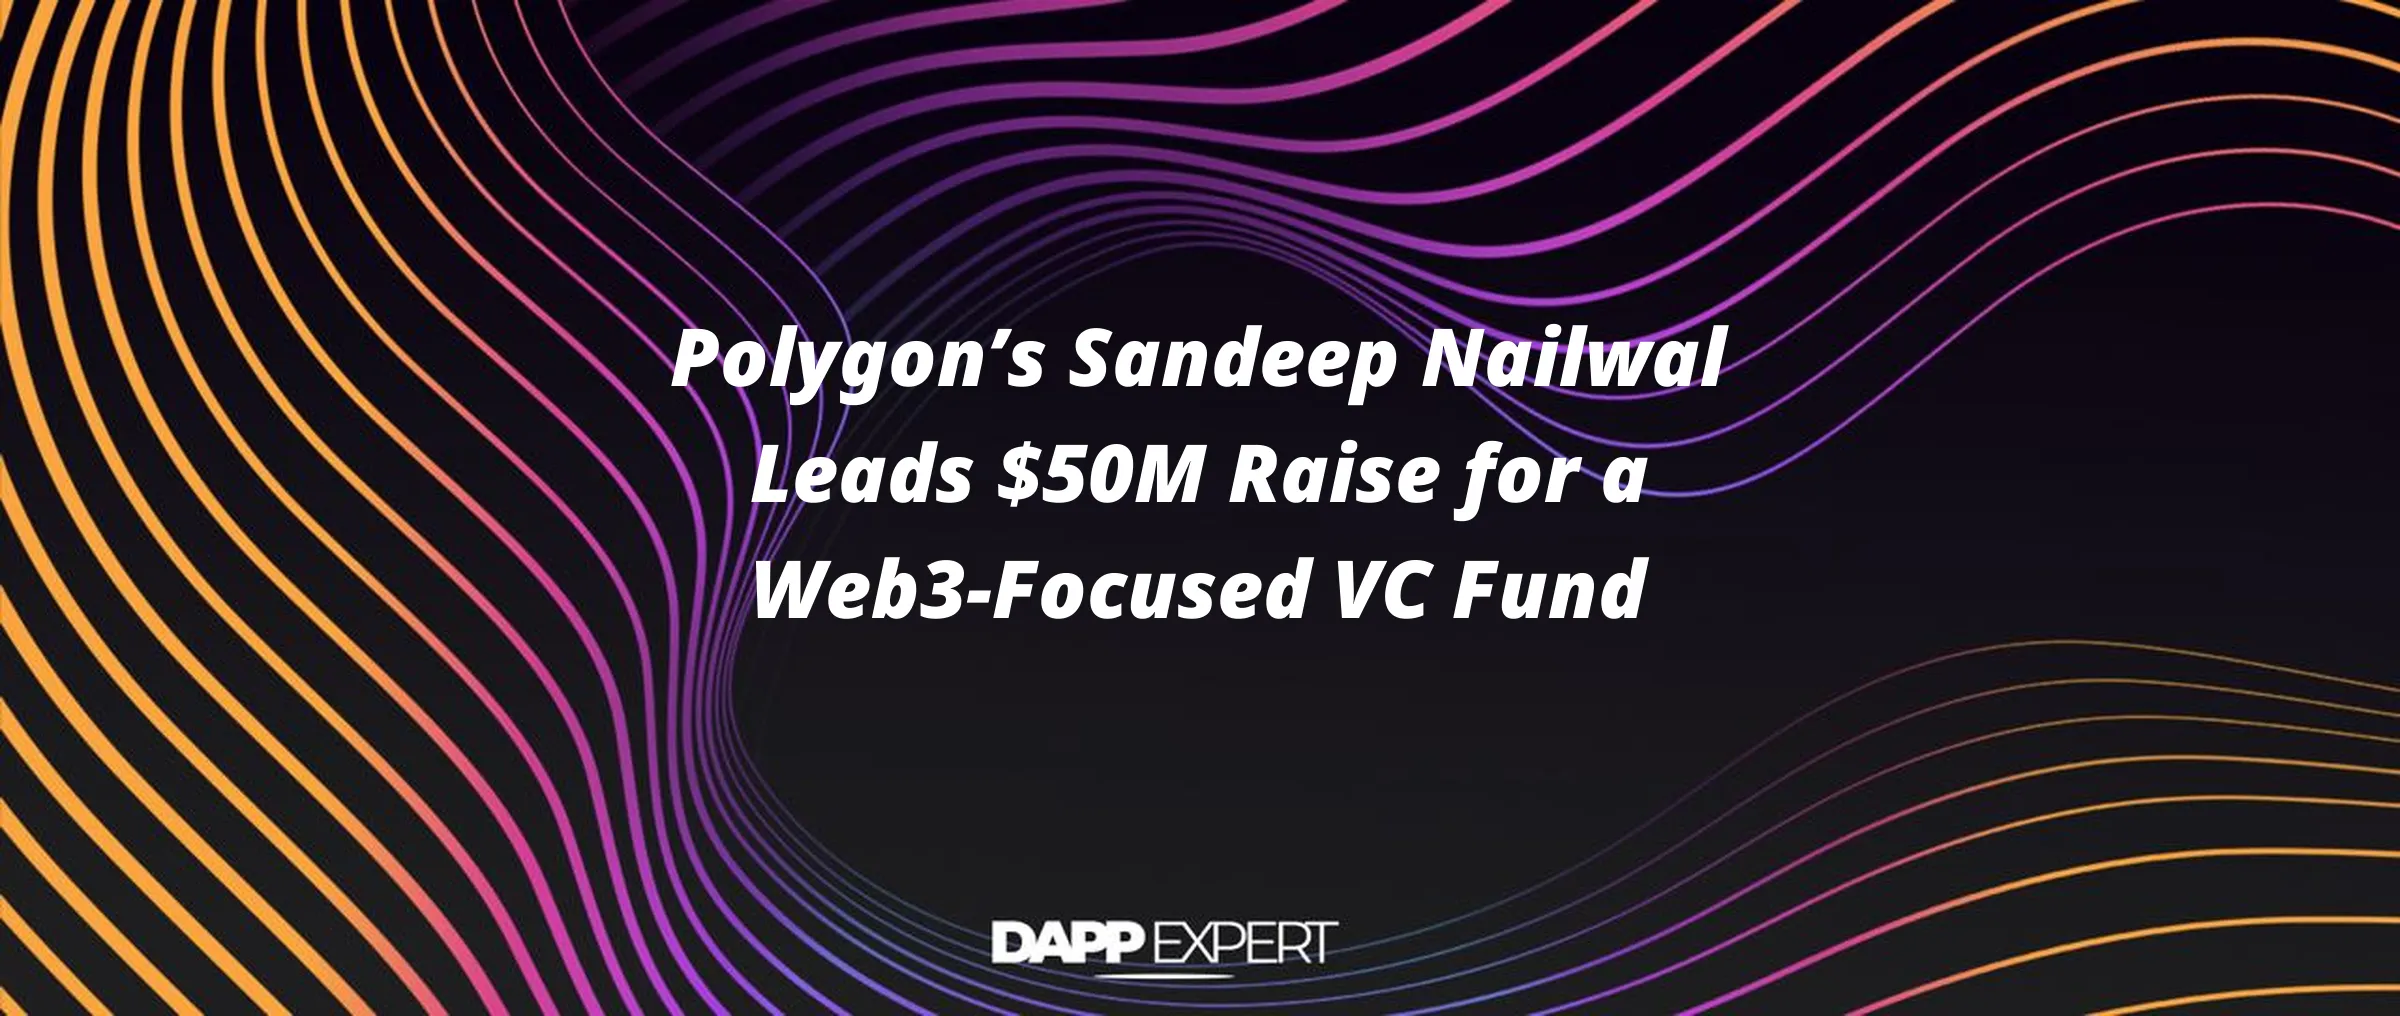 Polygon’s Sandeep Nailwal Leads $50M Raise for a Web3-Focused VC Fund